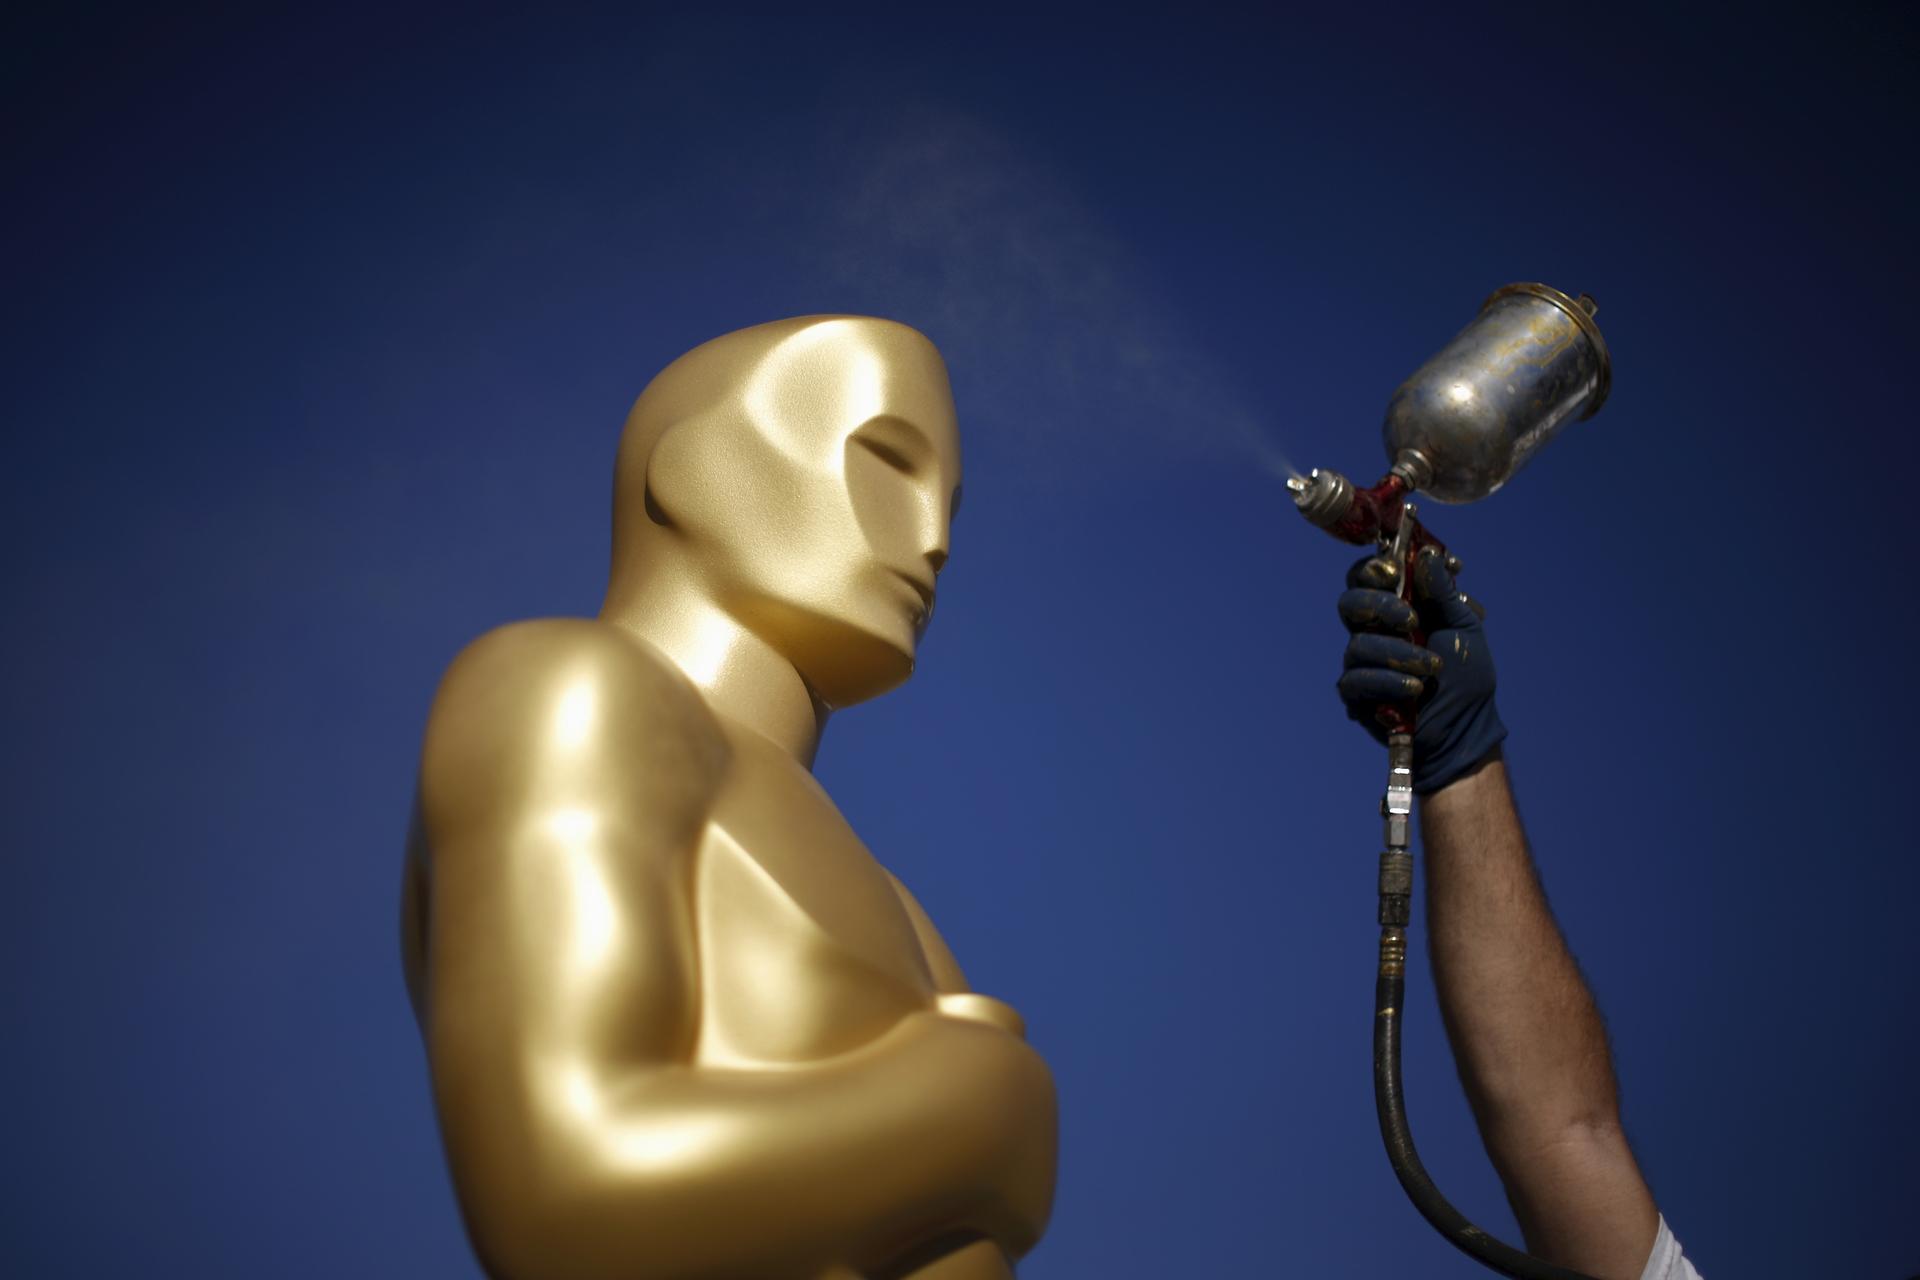 A worker spray paints an Oscar statue outside the Dolby Theatre on Feb. 25, 2016 in preparation for the 88th Academy Awards in Hollywood.